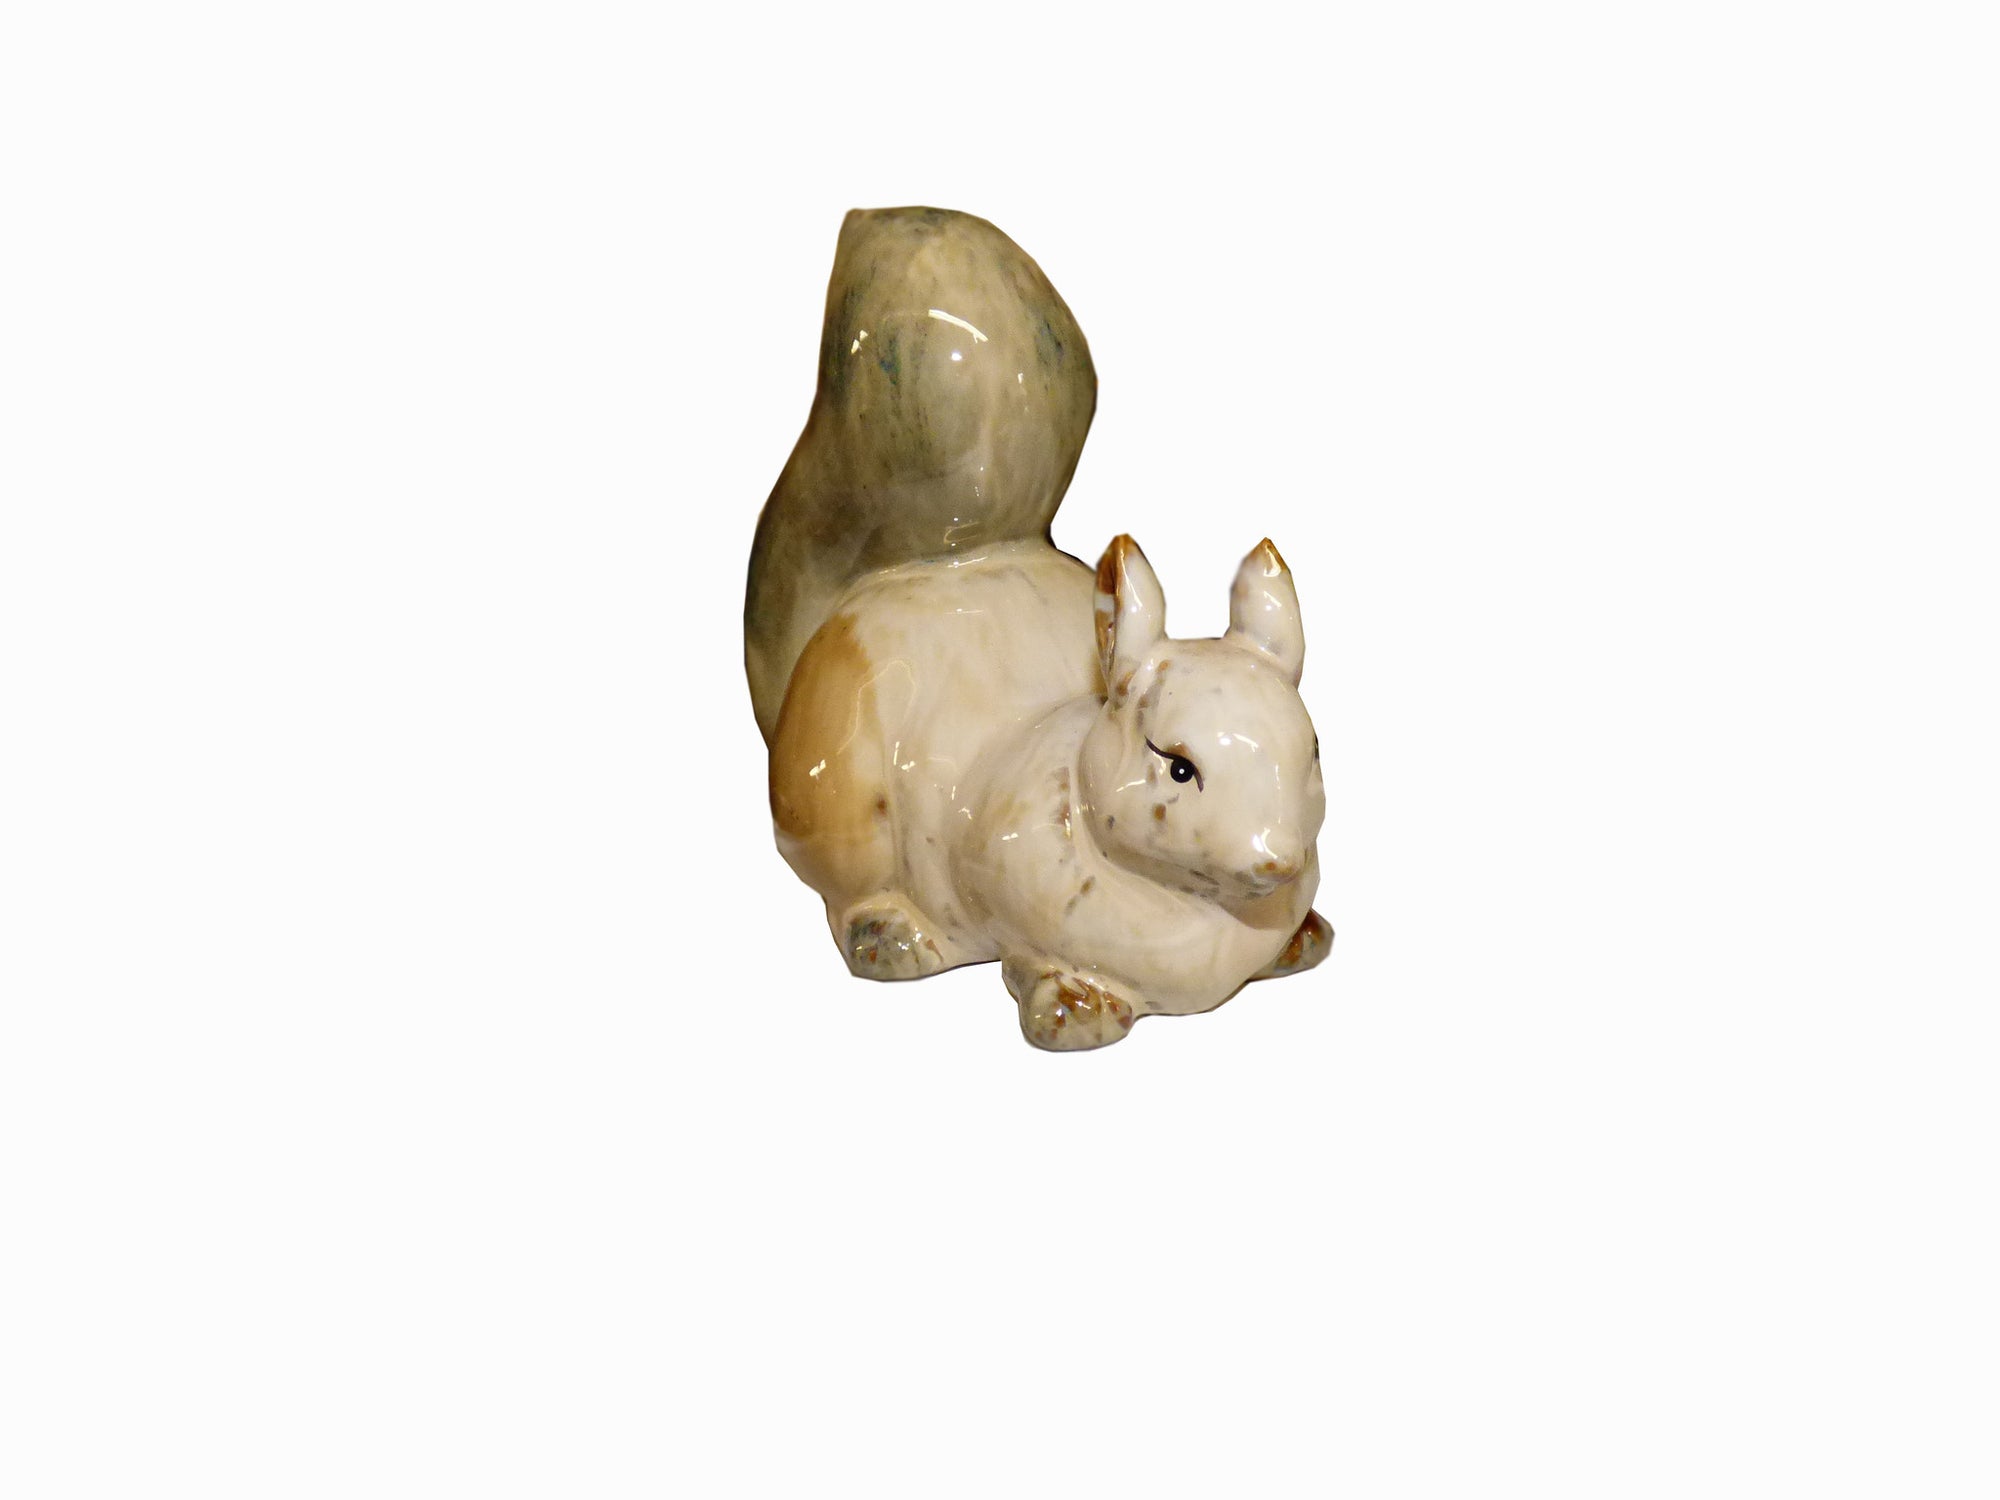 Squirrel Pottery Statue - Squirrels and More